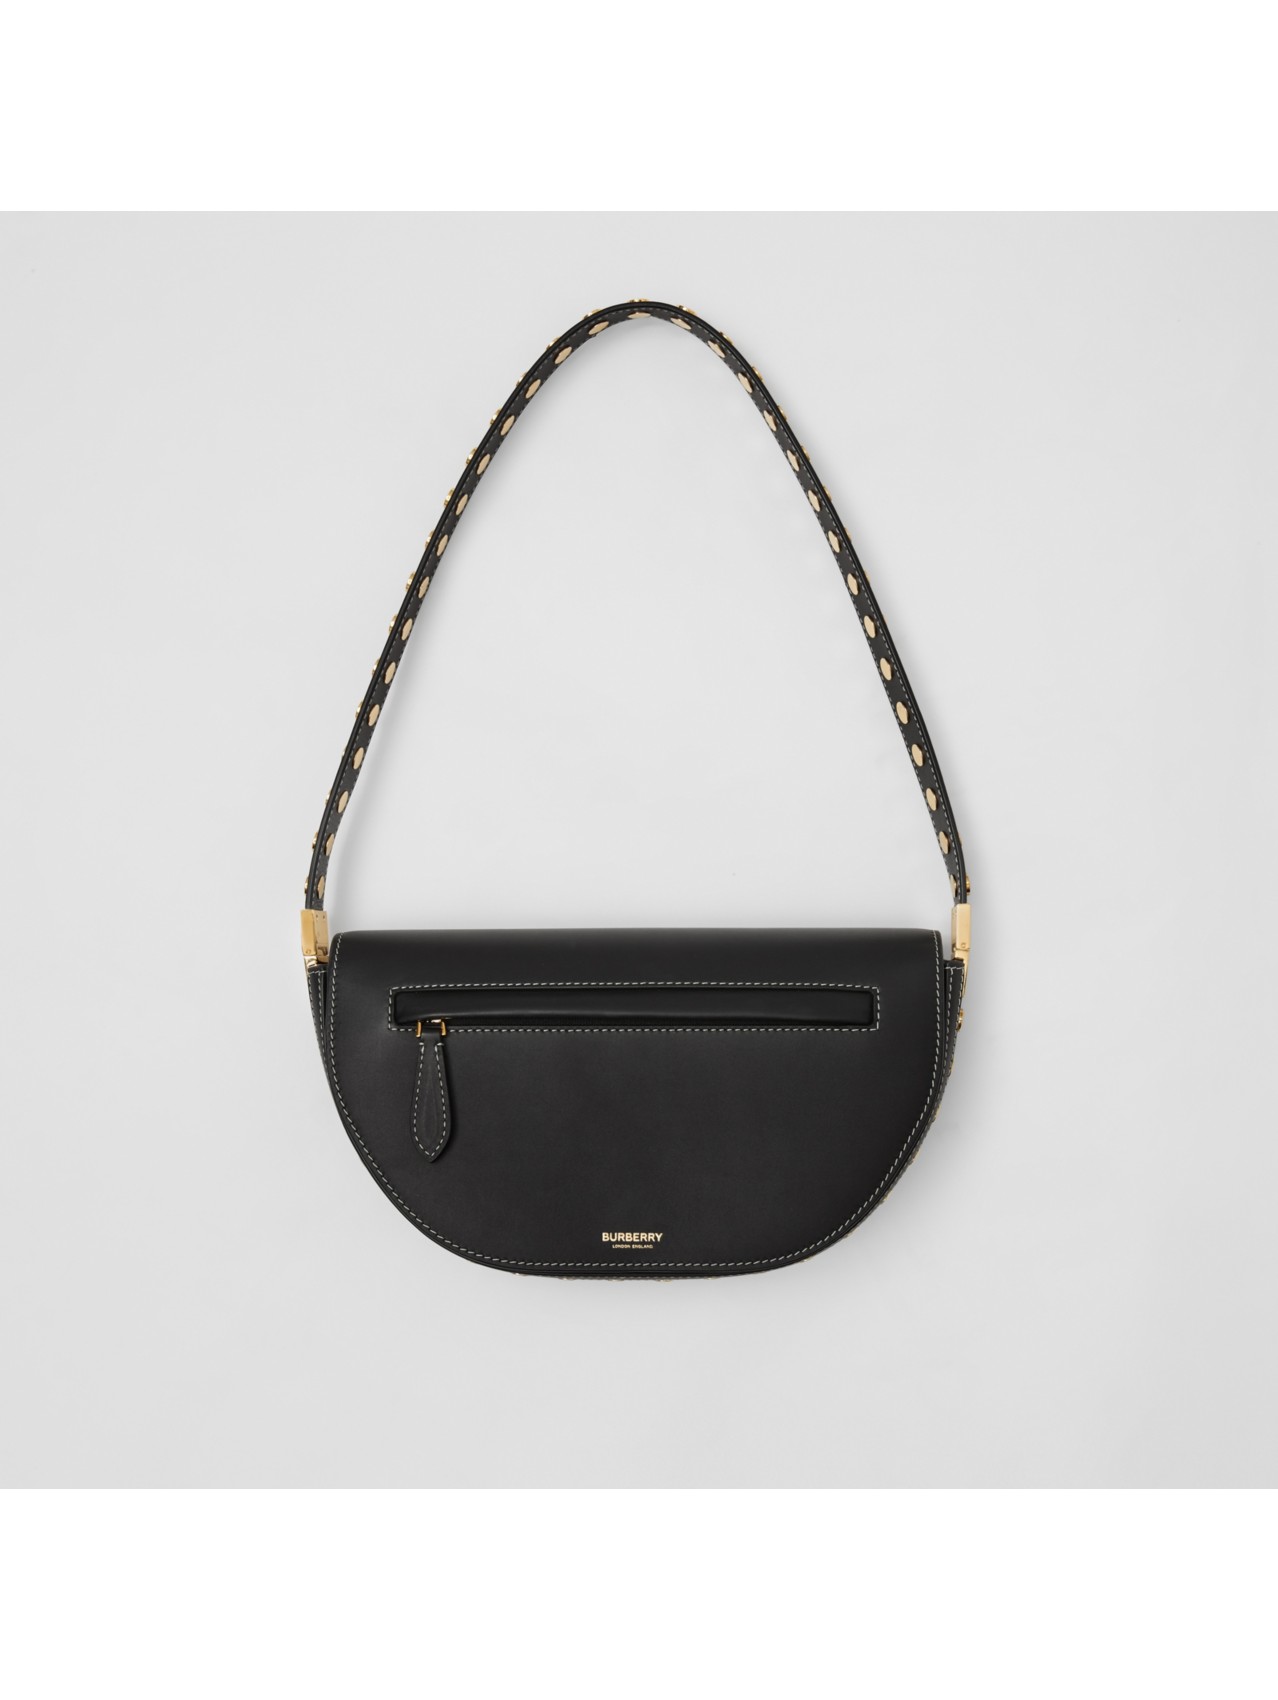 Women's Bags | Leather Shoulder Bags | Official